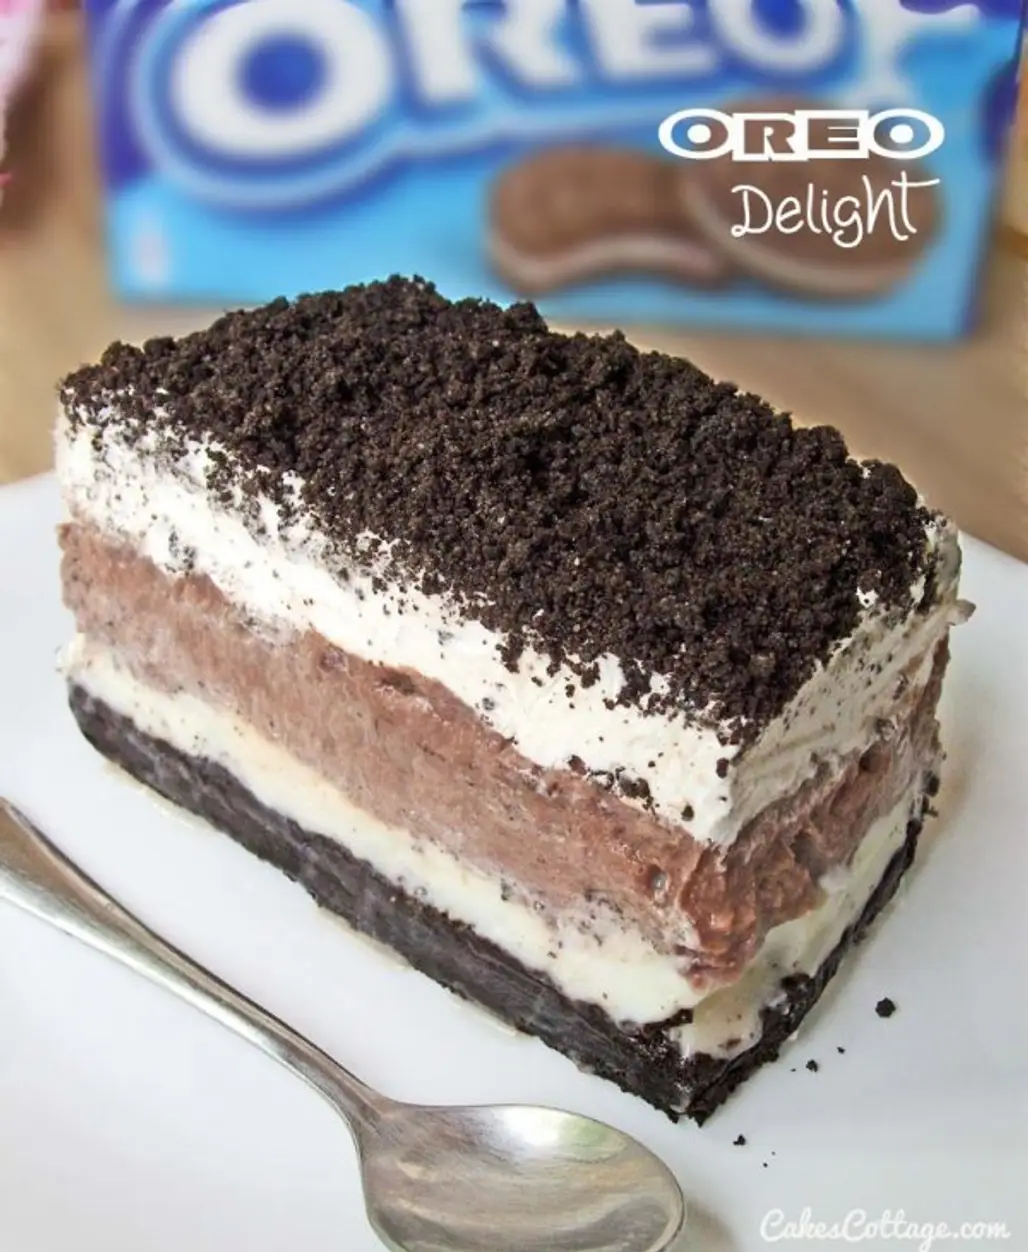 Oreo Delight with Chocolate Pudding